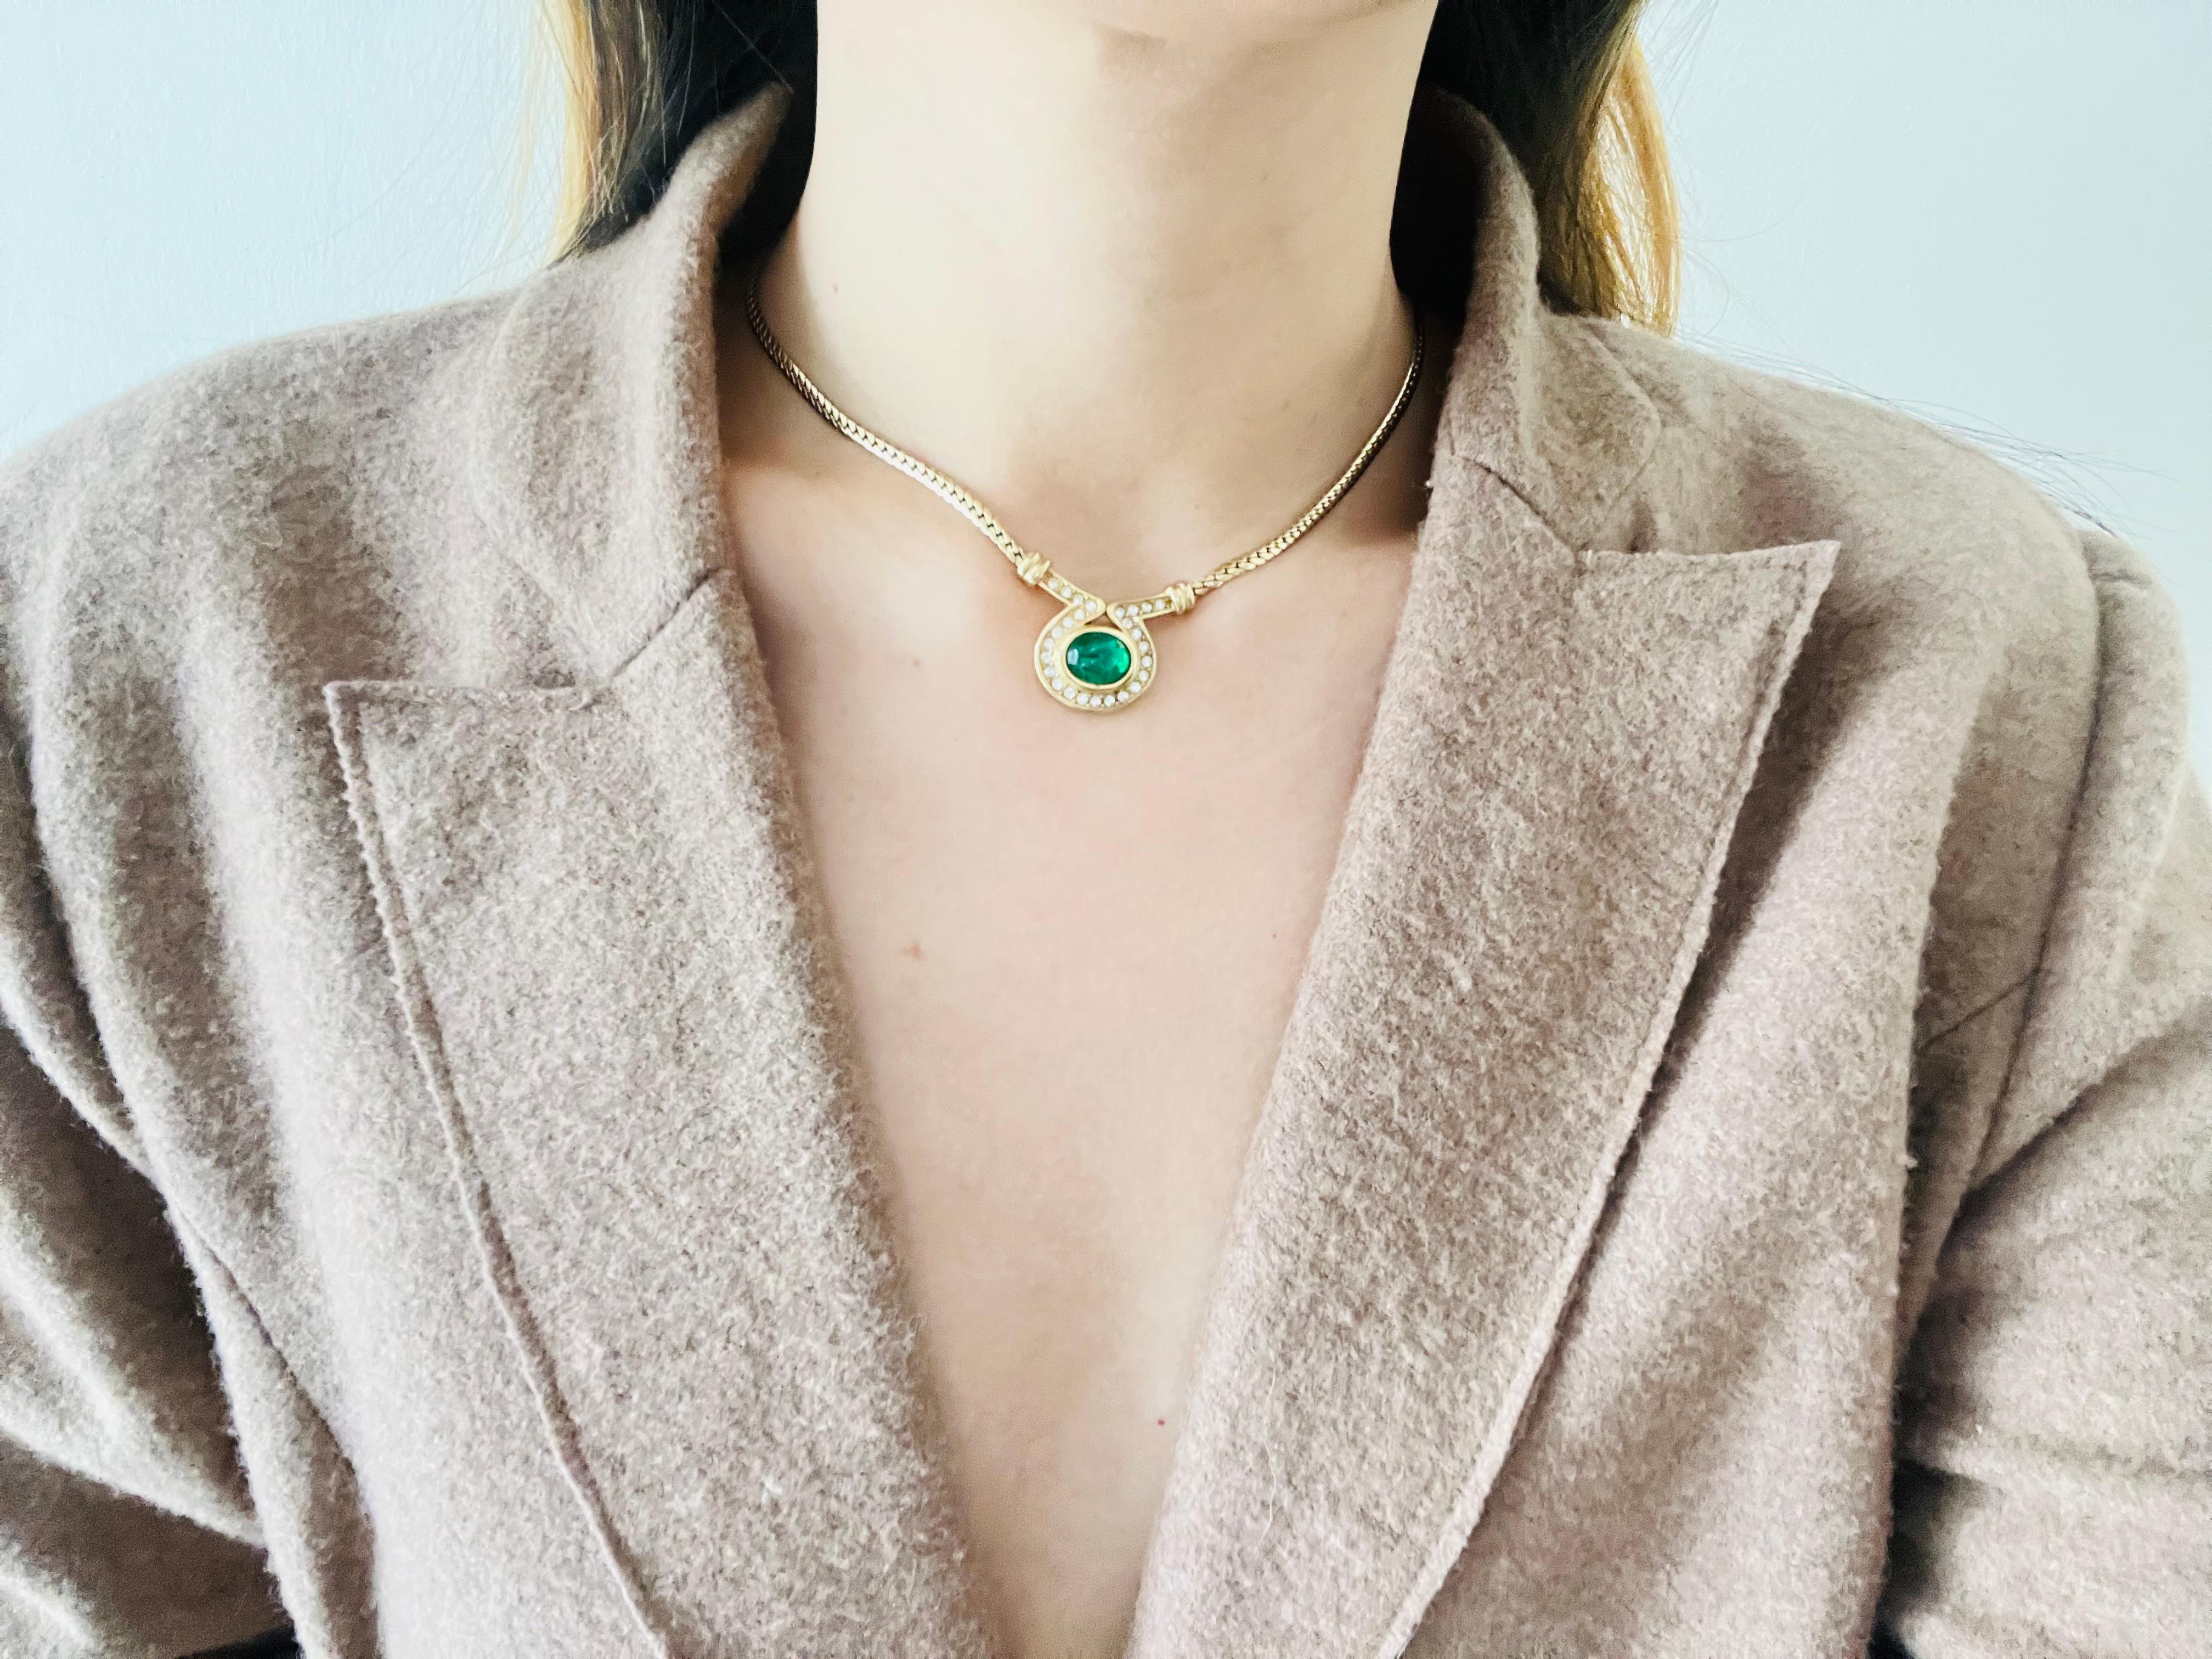 Christian Dior Vintage 1980s Emerald Green Gripoix Oval Pendant Crystal Necklace For Sale 3